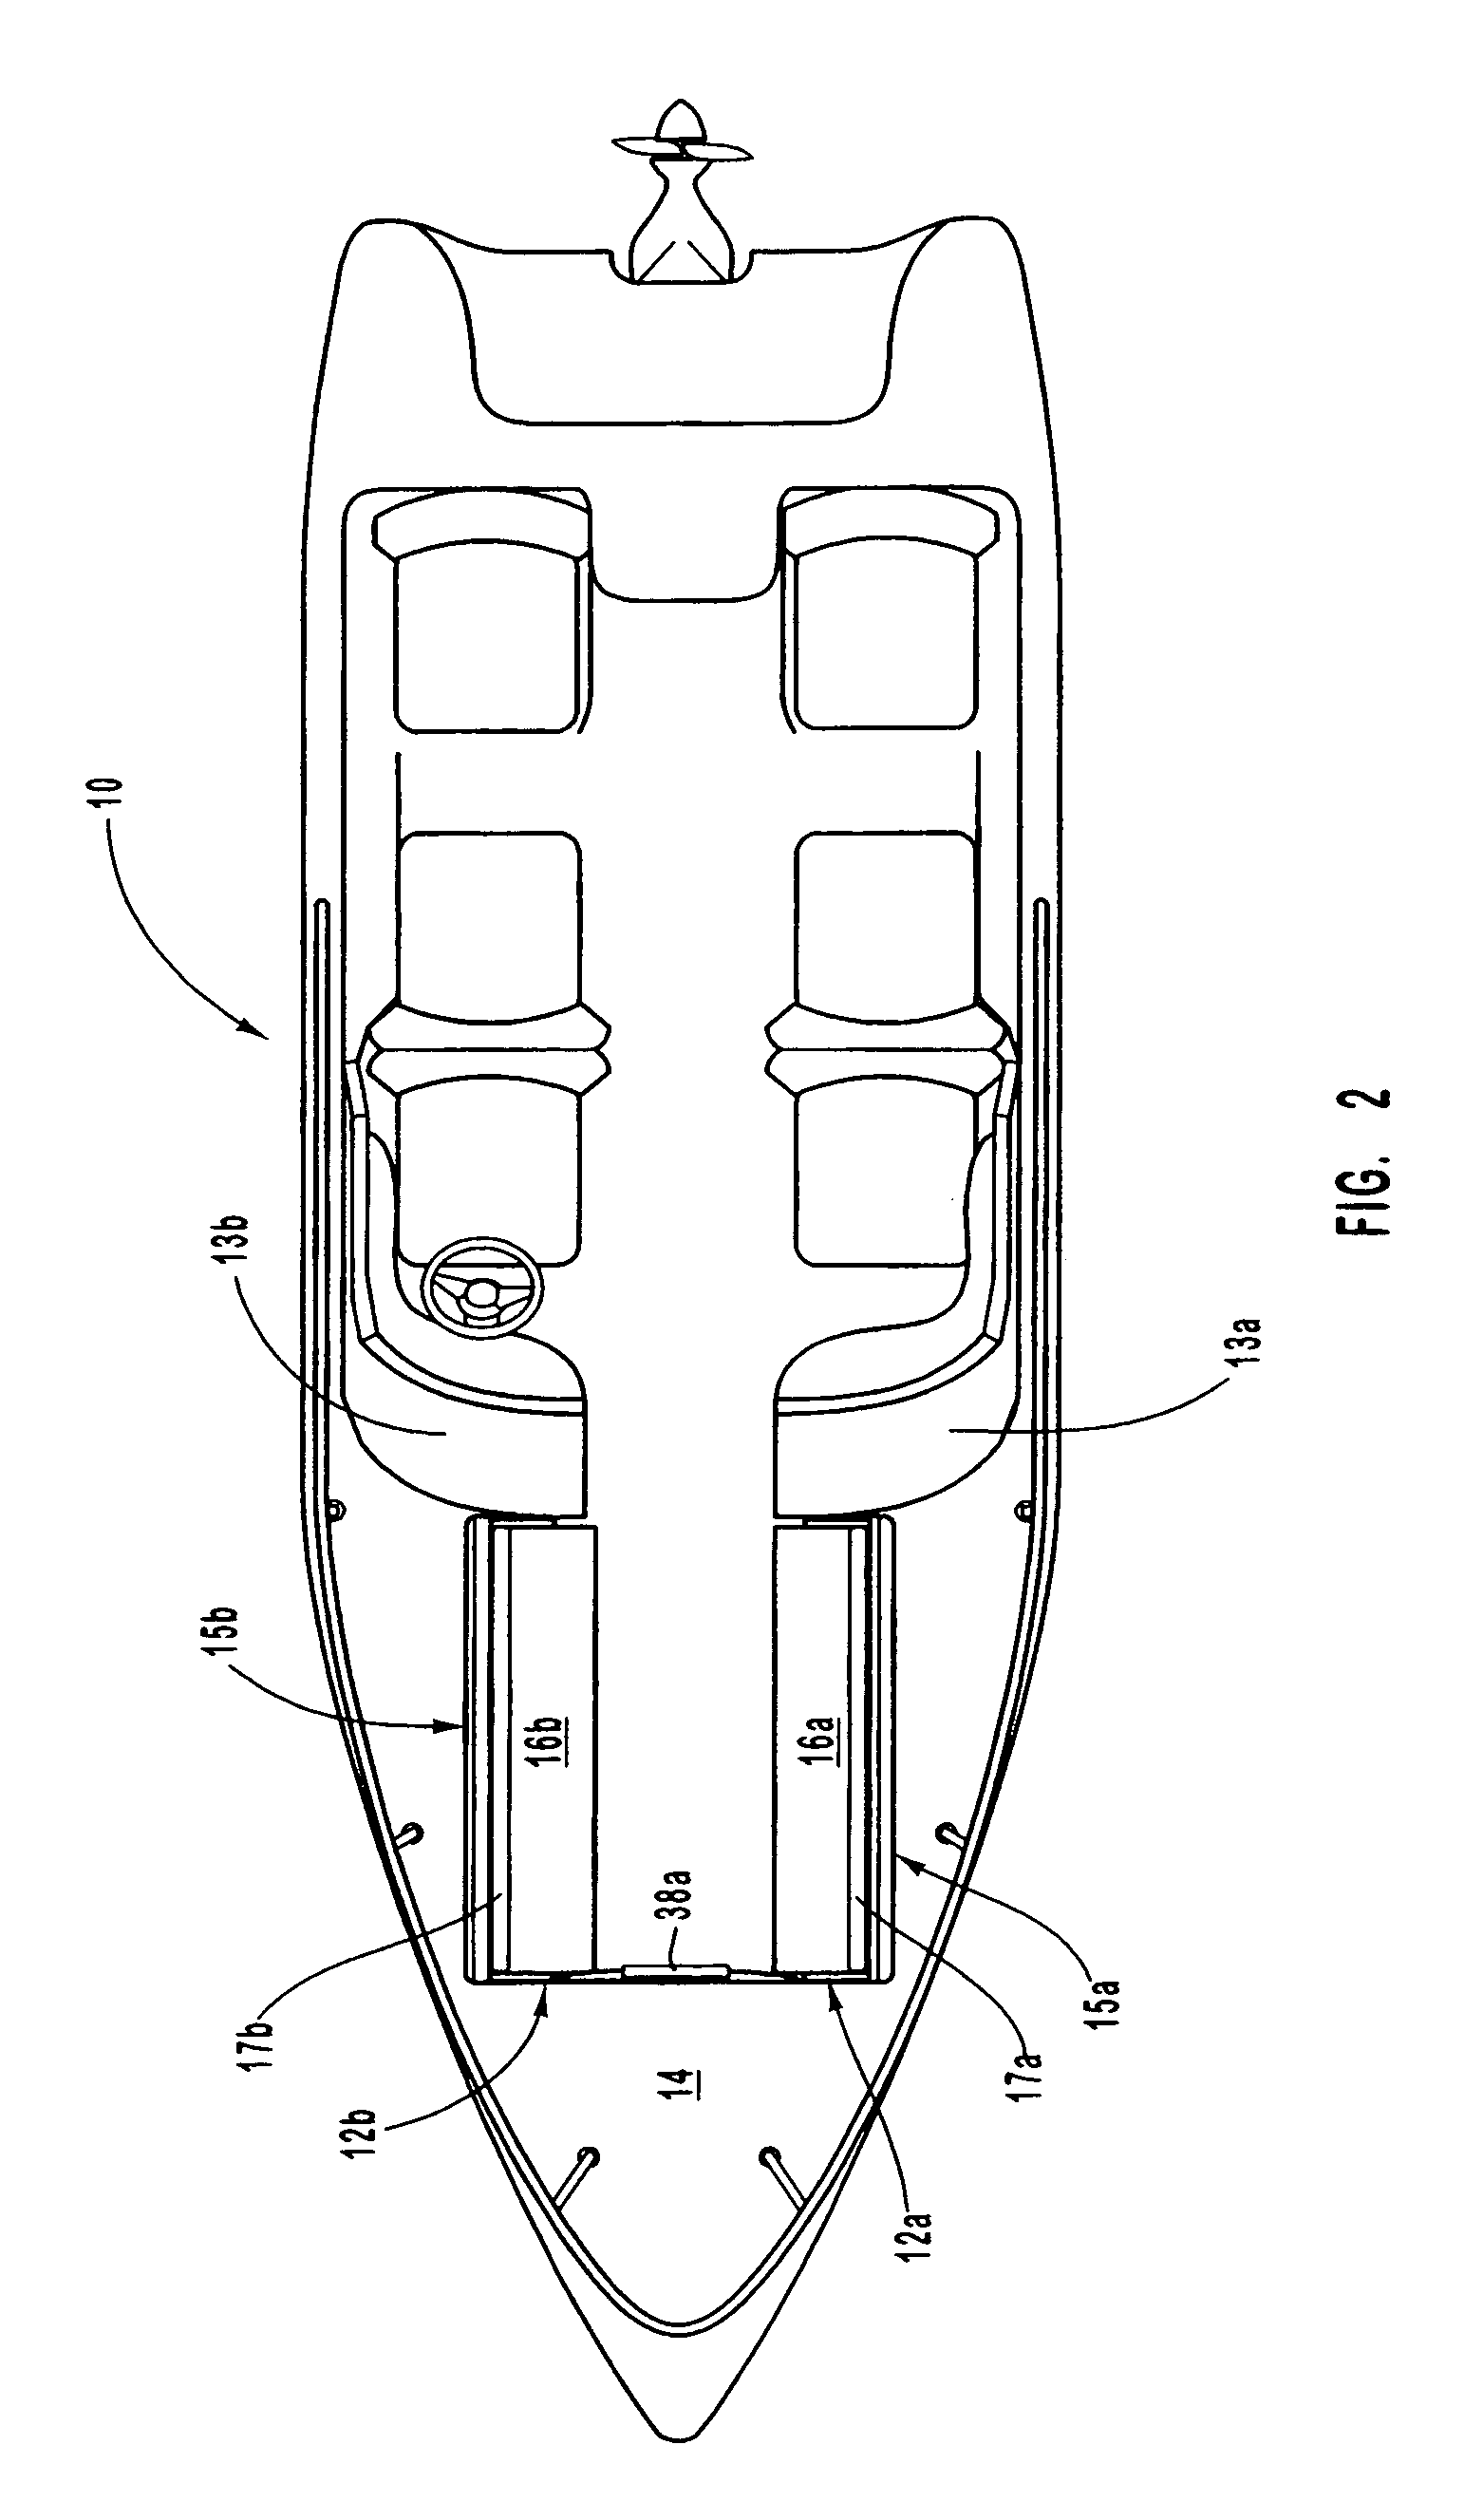 Combination seating and decking for an open bow boat